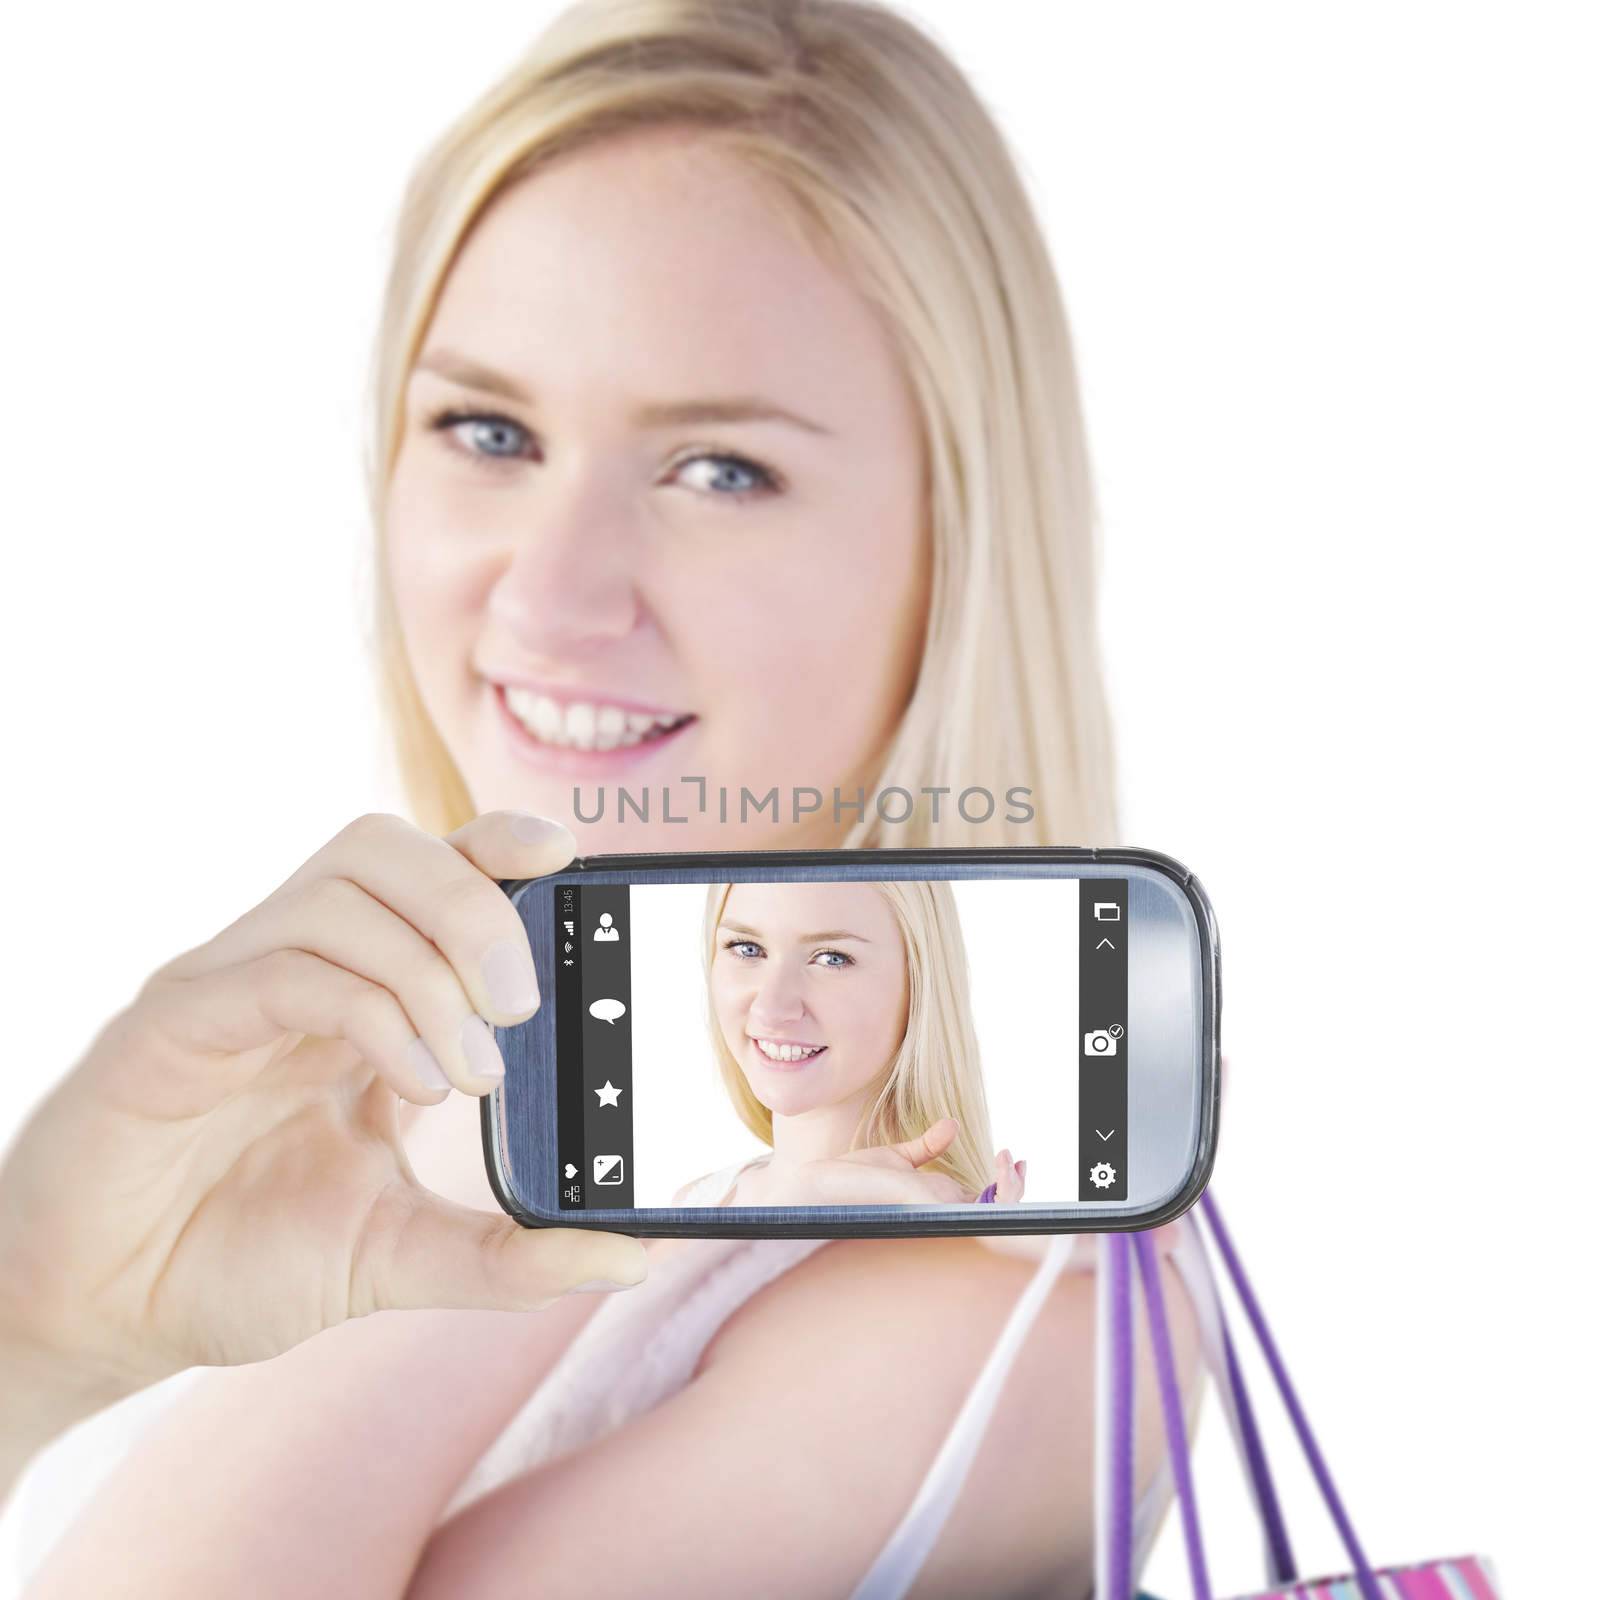 Composite image of hand holding smartphone showing by Wavebreakmedia